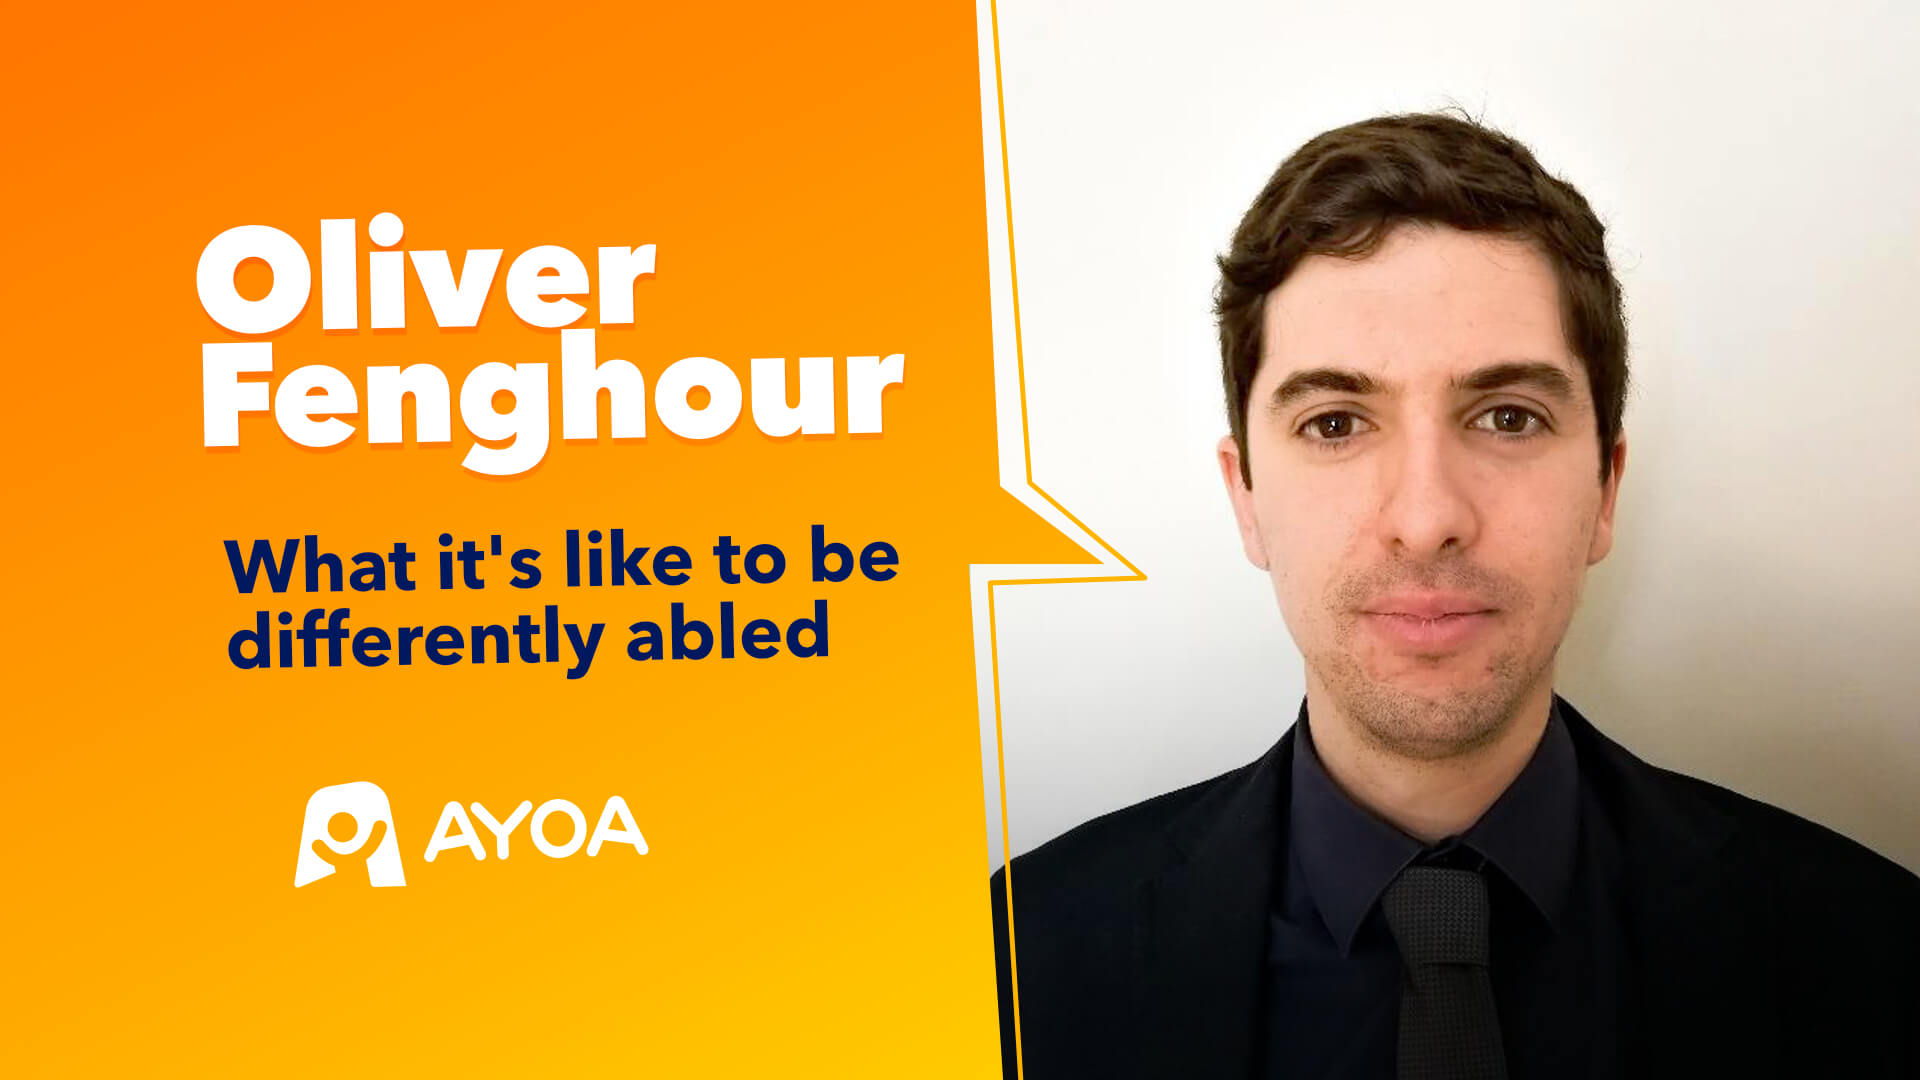 Ayoa | What it’s like to be Differently Abled: My Story by Oliver Fenghour